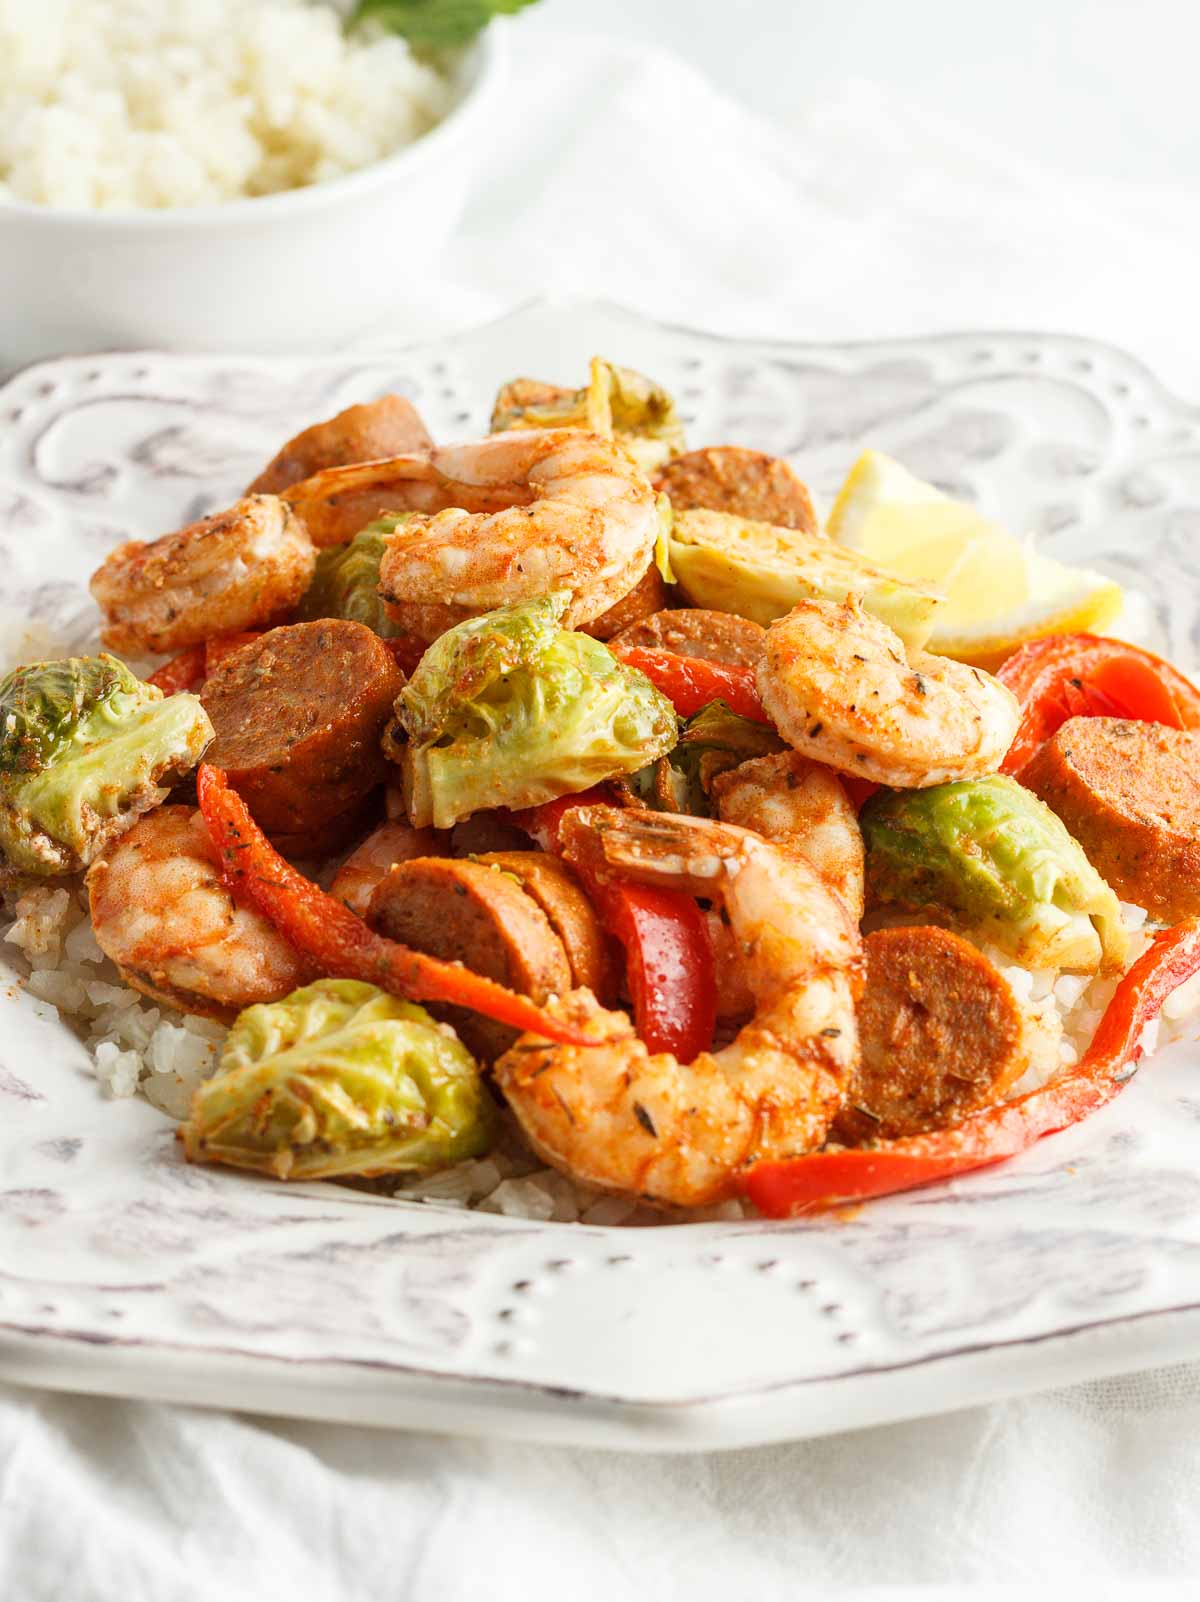 A  plate of Cajun shrimp and sausage with veggies and cauliflower rice.